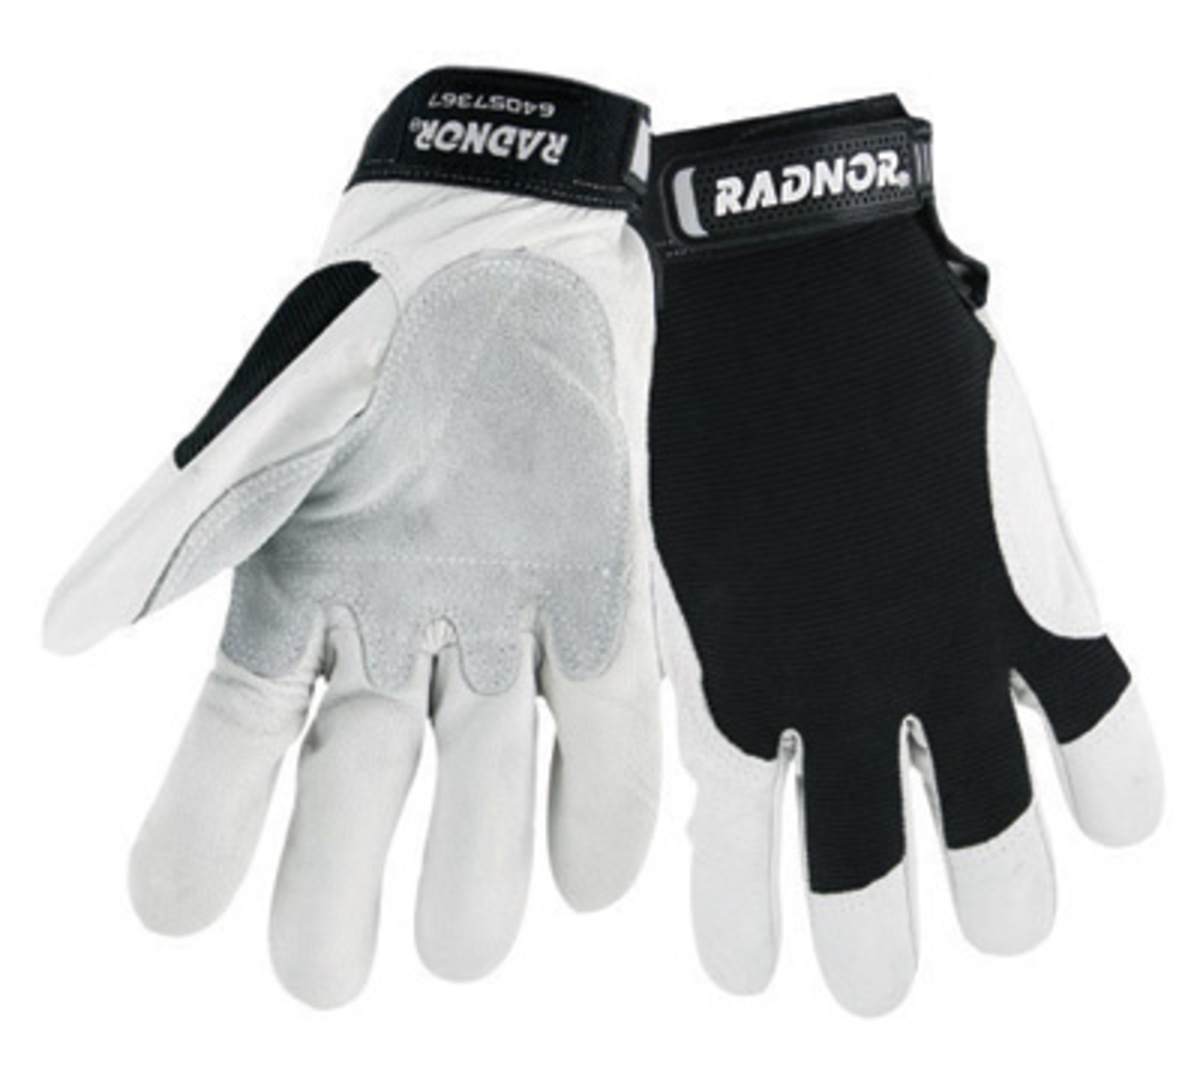 RADNOR® Large White And Black Goatskin Full Finger Mechanics Gloves With Hook And Loop Cuff